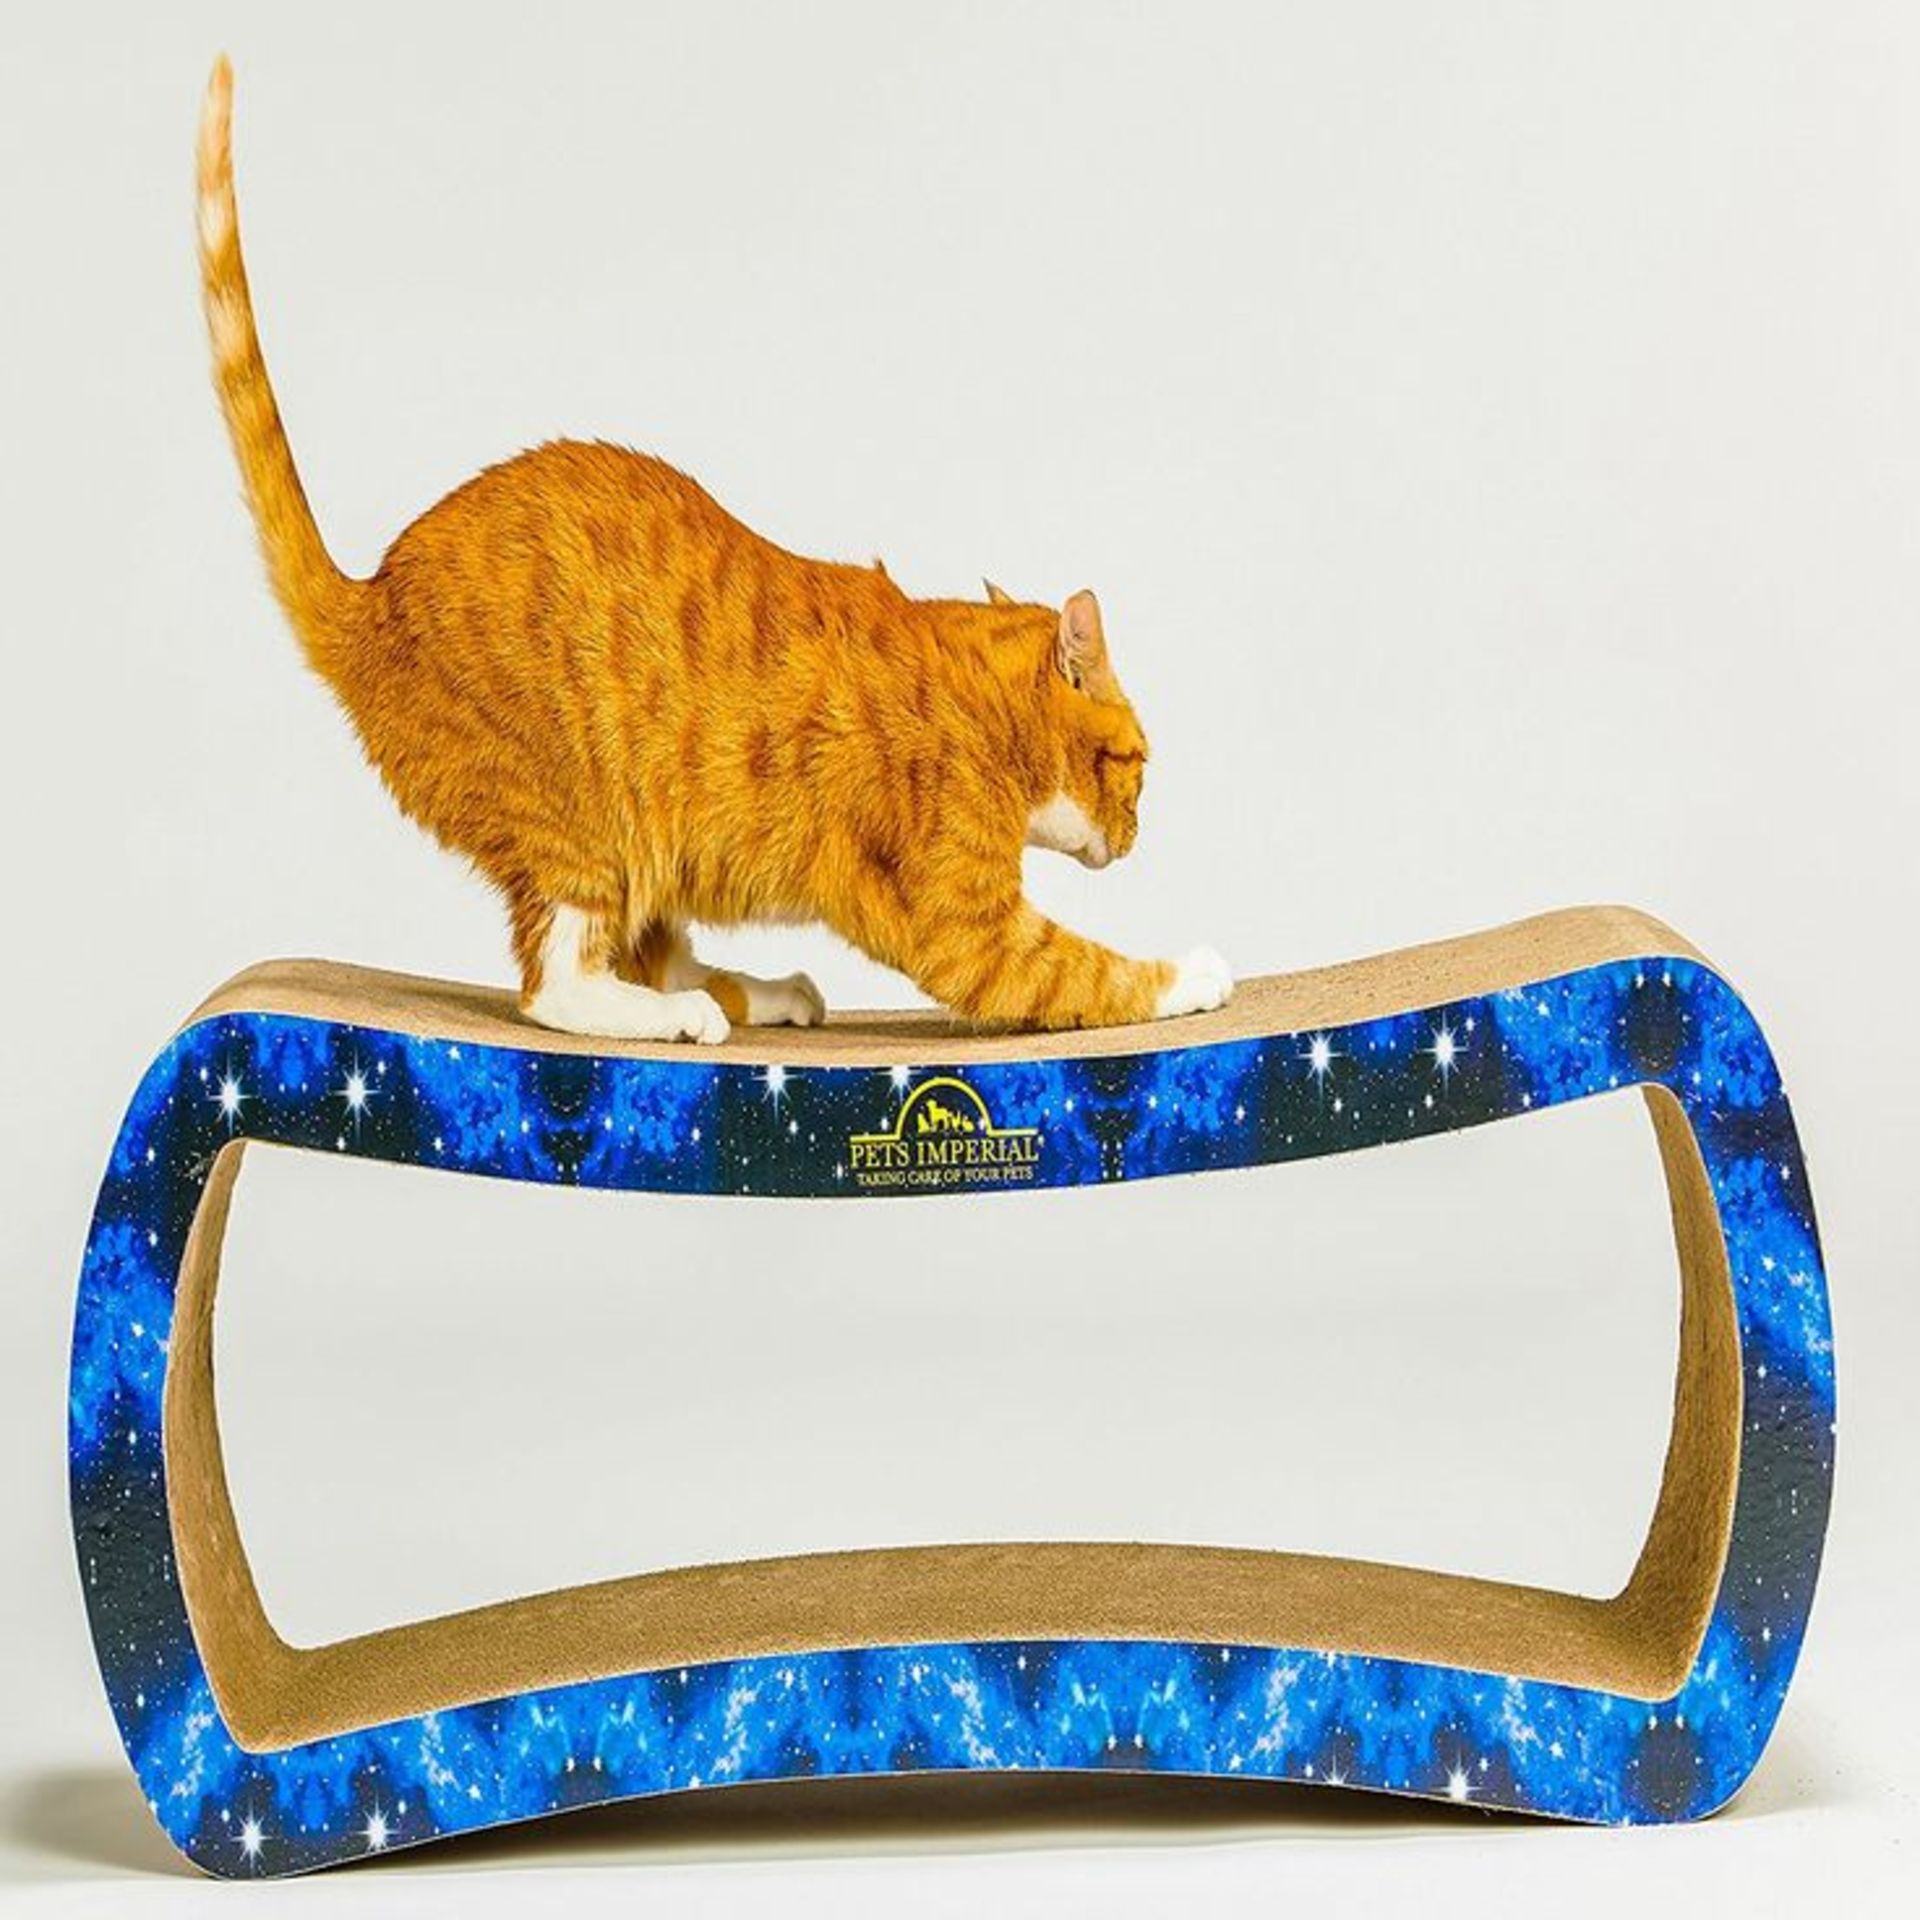 2x BRAND NEW PETS IMPERIAL EMPEROR CAT SCRATCHER LOUNGE WITH BLUE STARRY COLOR PAPER. (S1RA)